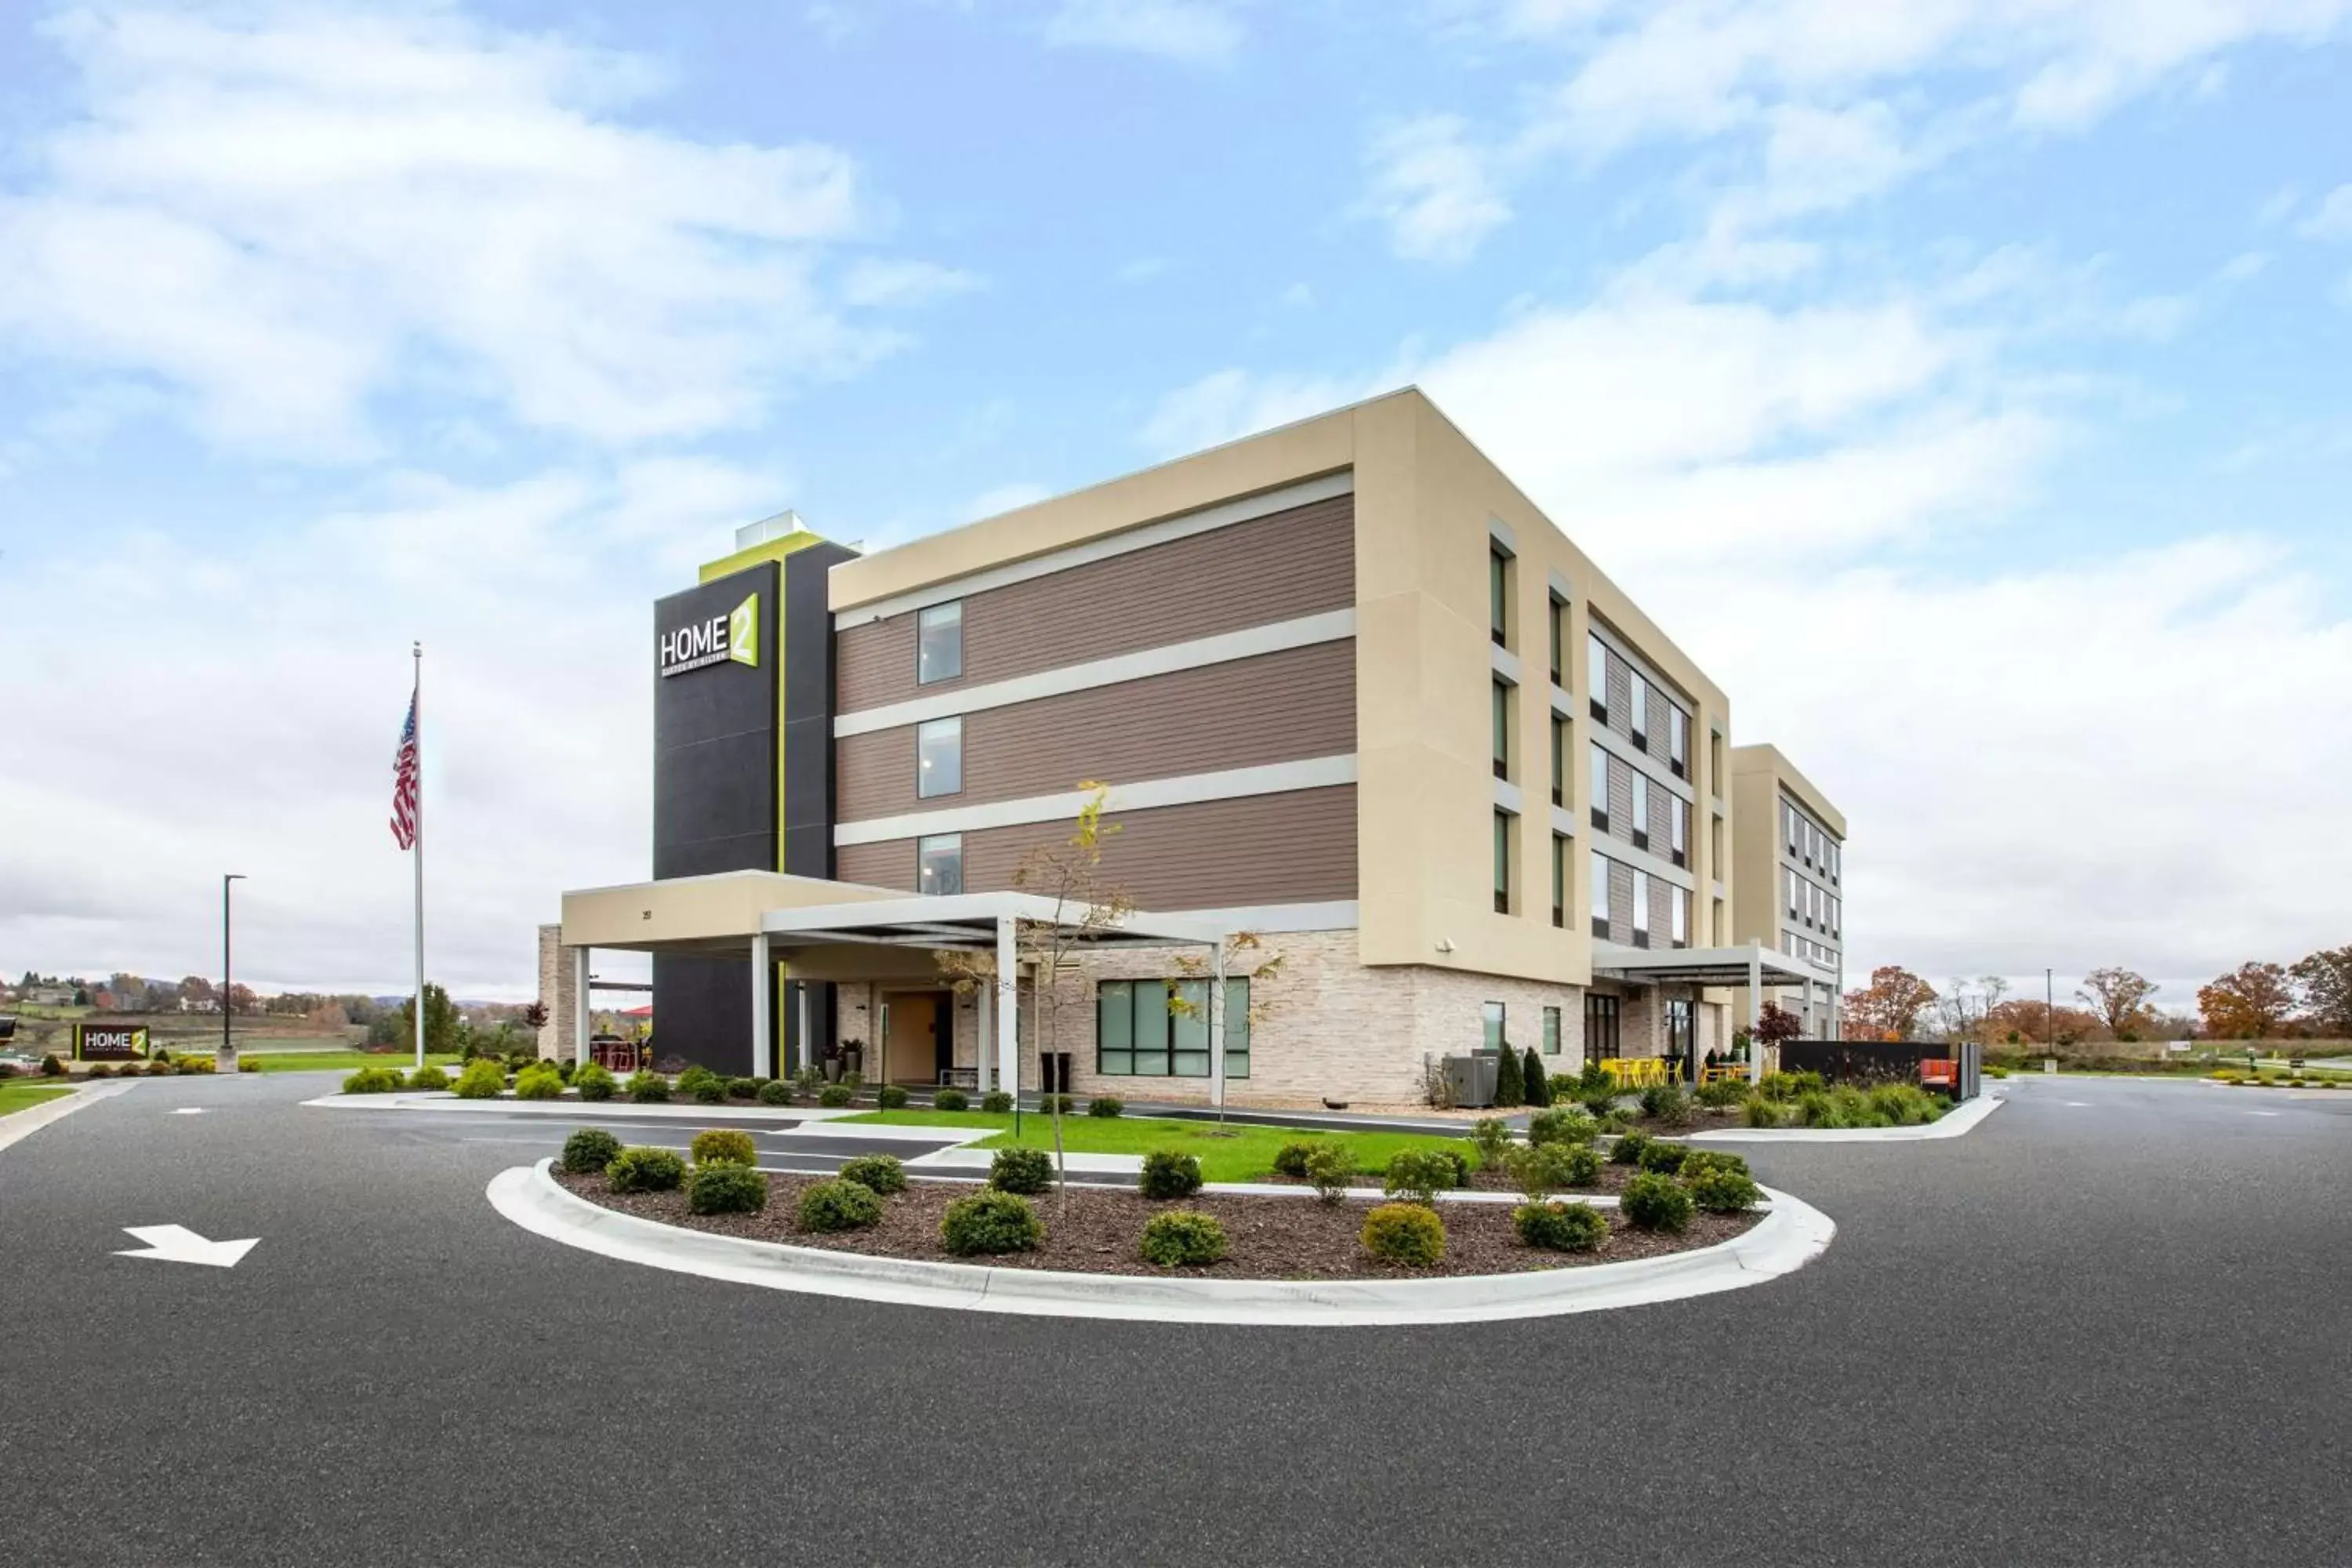 Property Building in Home2 Suites By Hilton Lewisburg, Wv